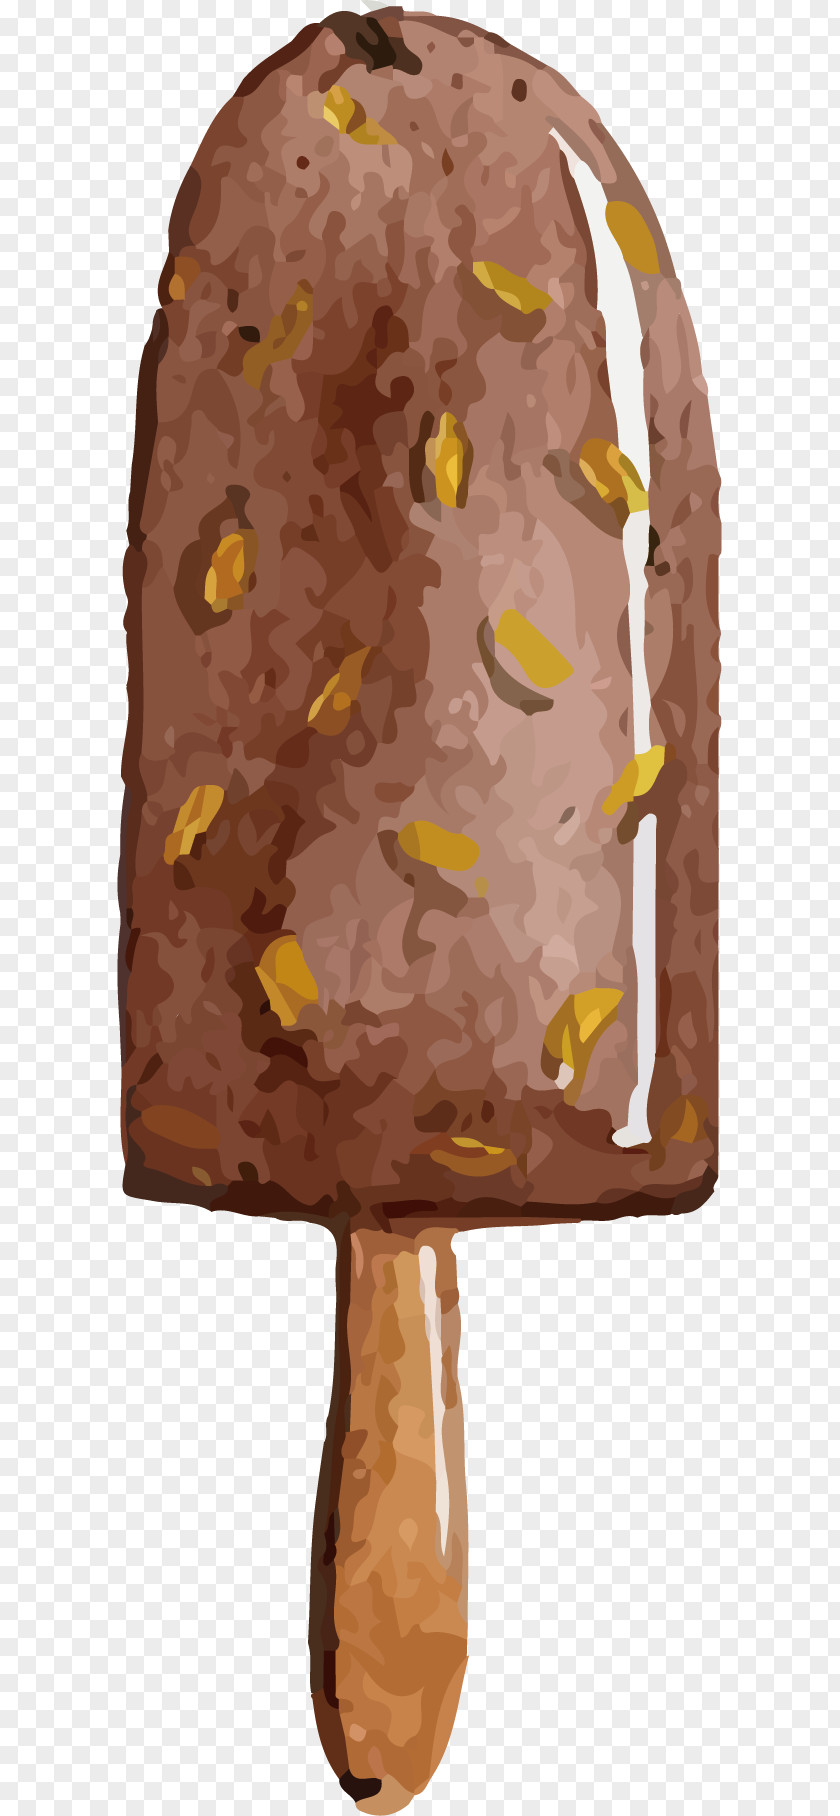 Vector Hand-painted Chocolate Popsicle Ice Cream Cone Pop PNG